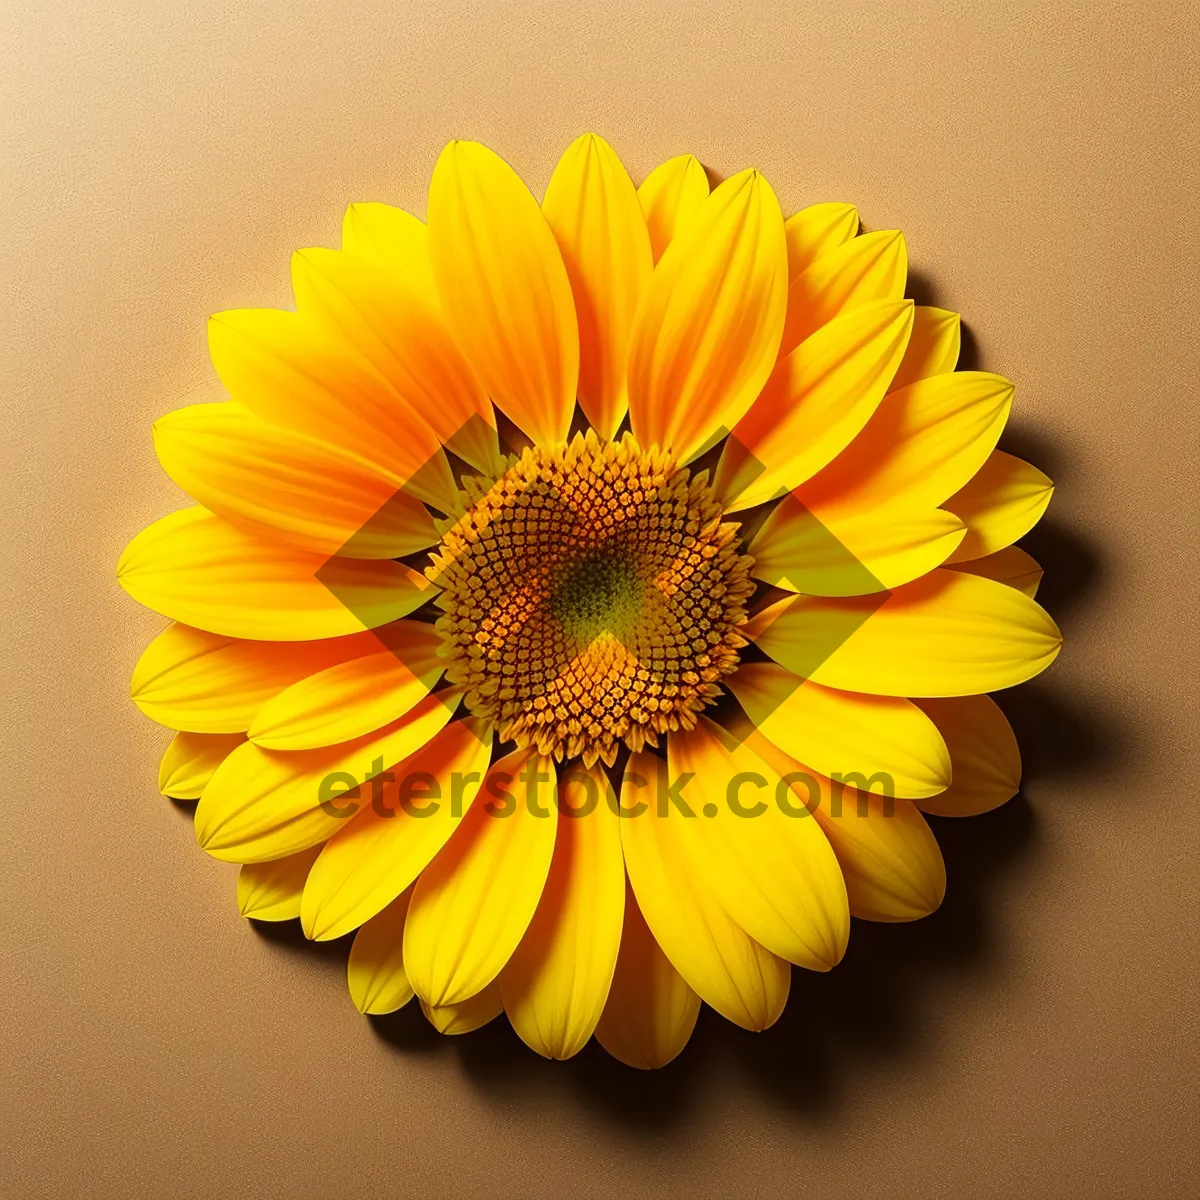 Picture of Vibrant Sunflower Blossom in Bloom